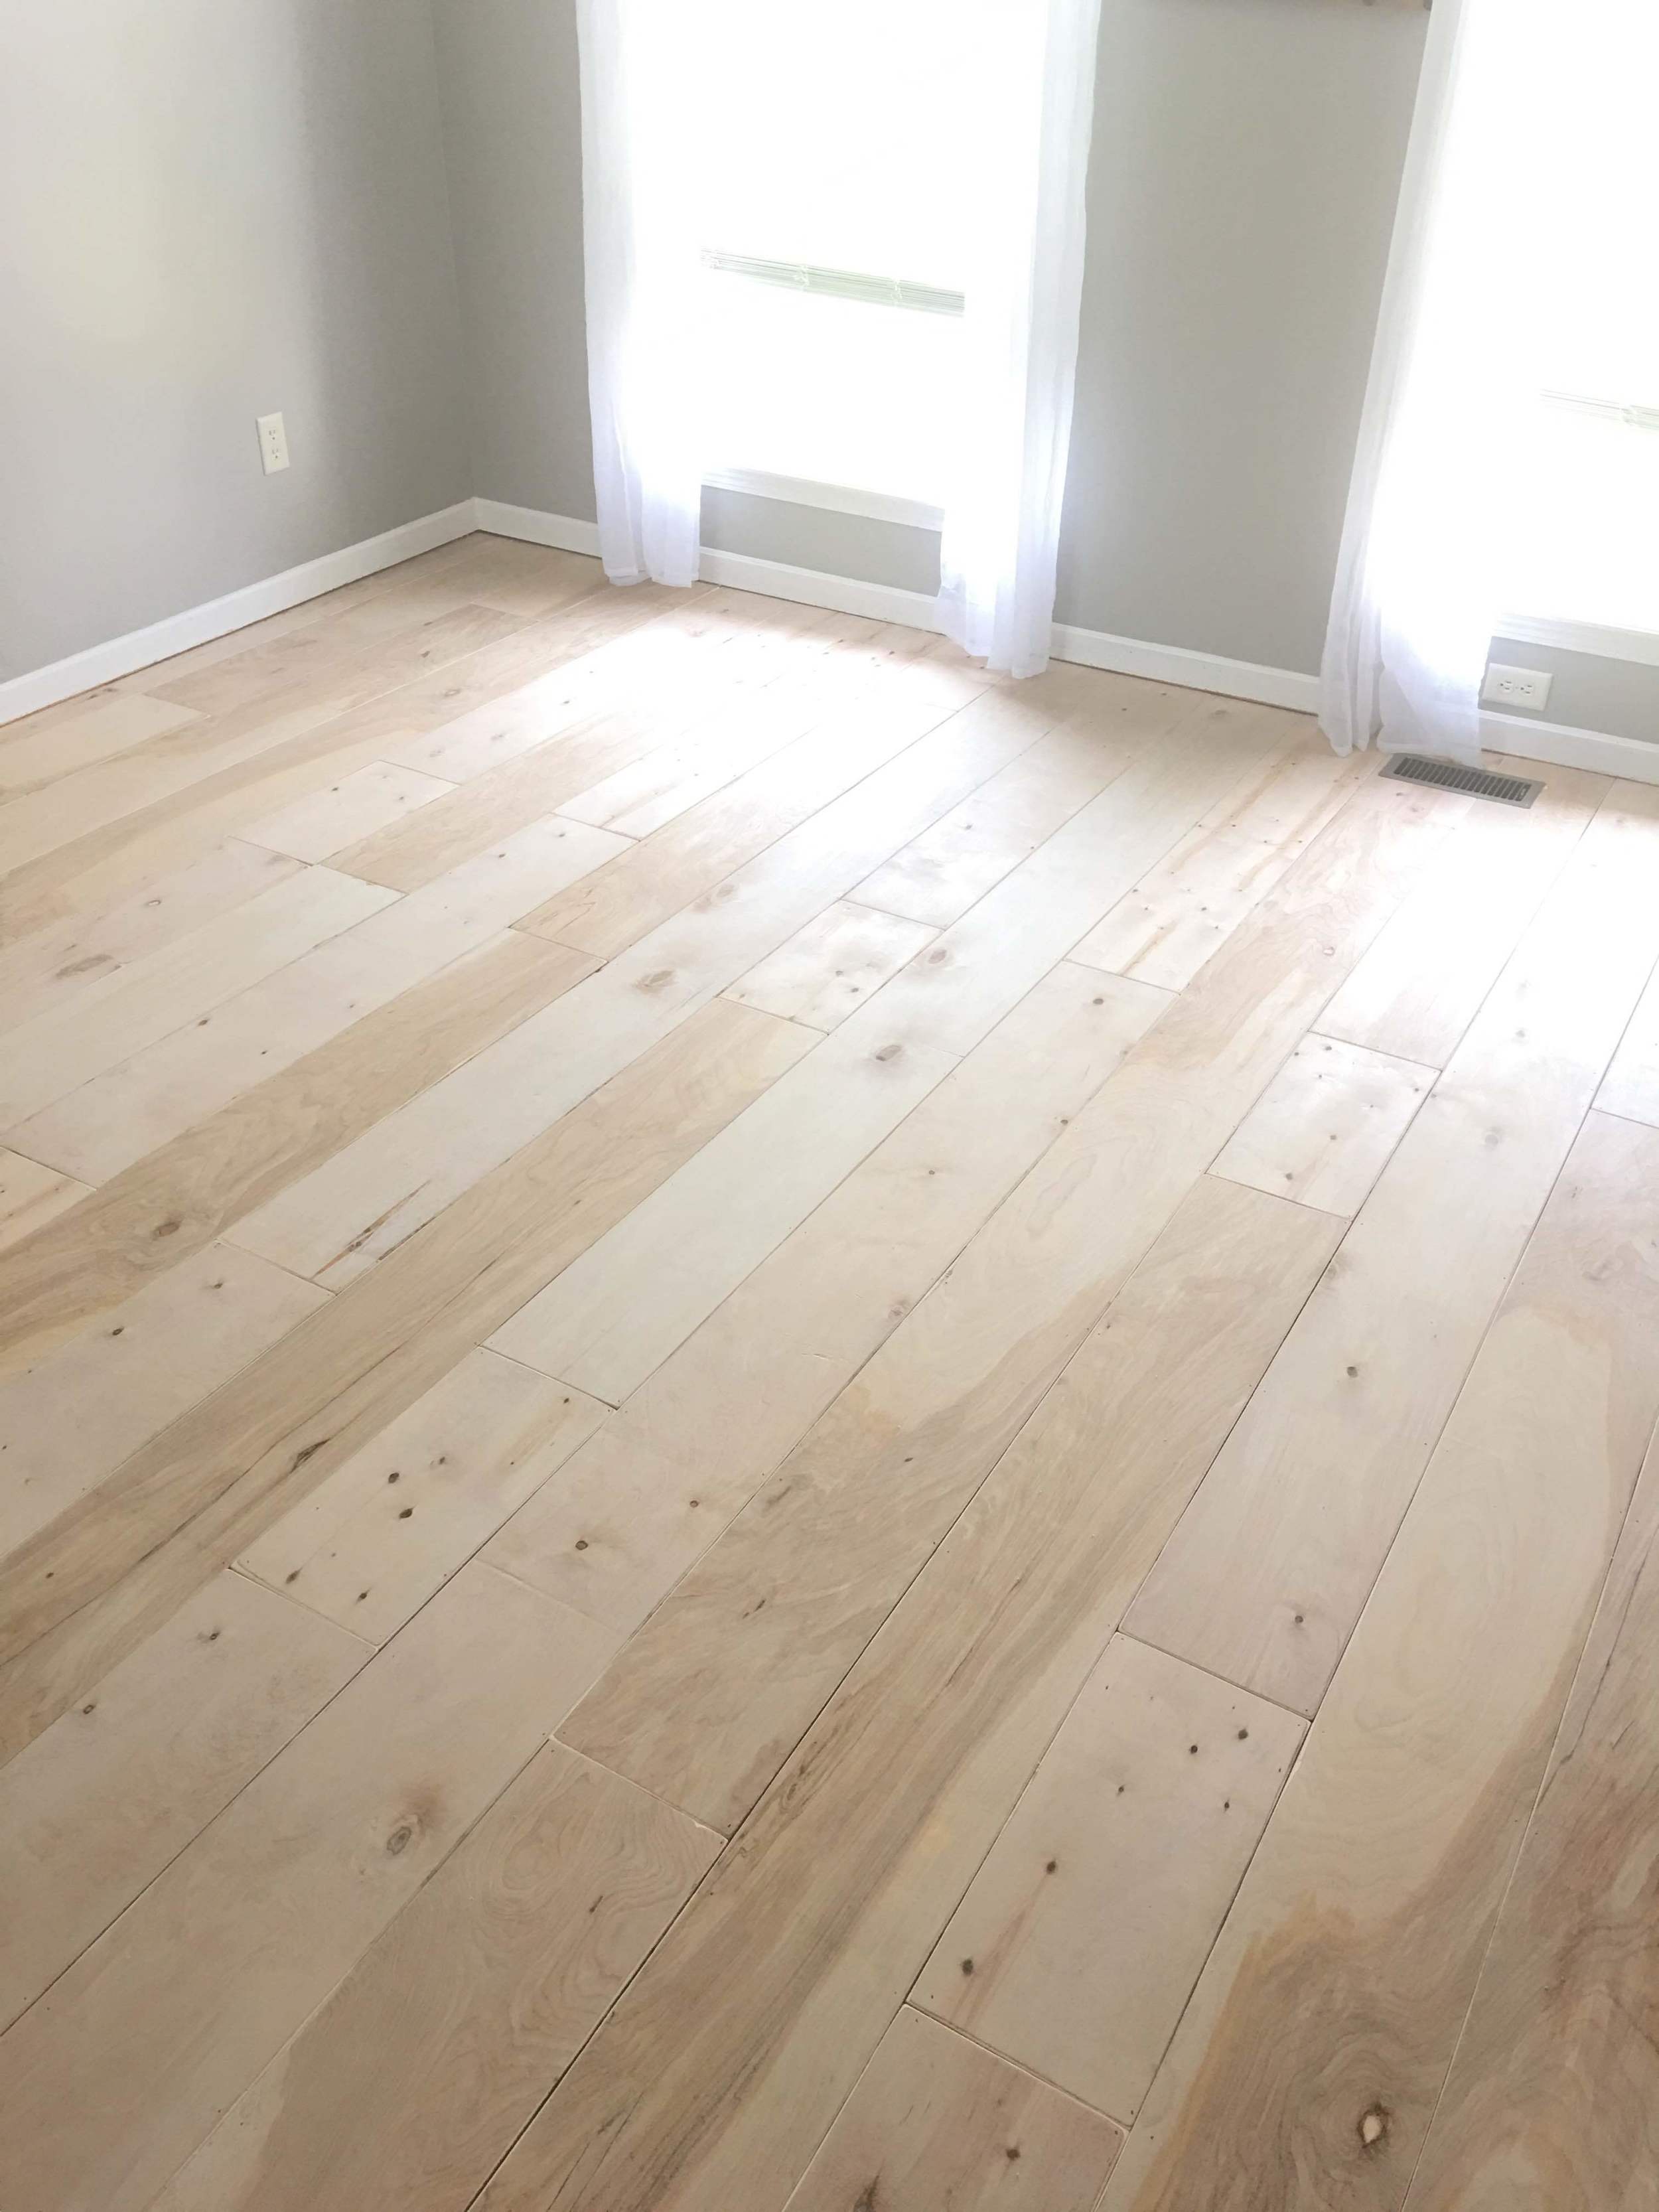 Plywood Turned Hardwood Flooring Diy The Other Side Of Neutral